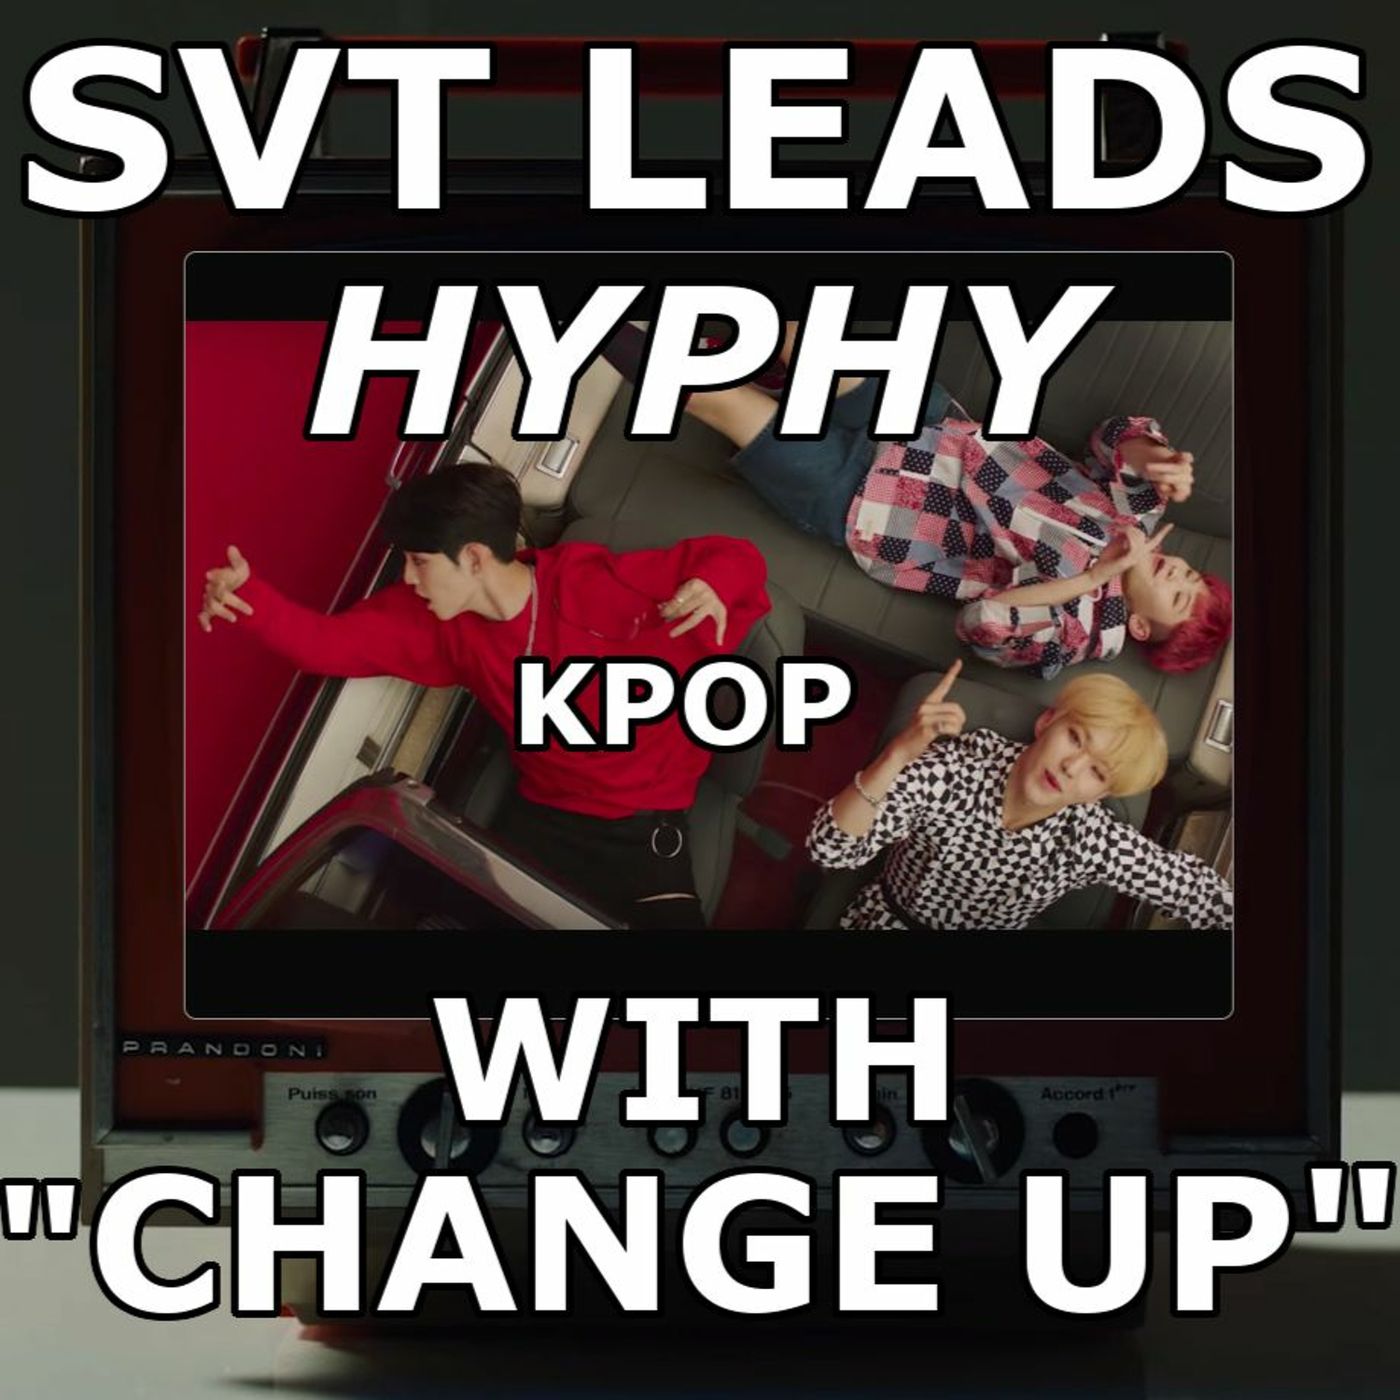 SVT Leads HYPHY Kpop With 